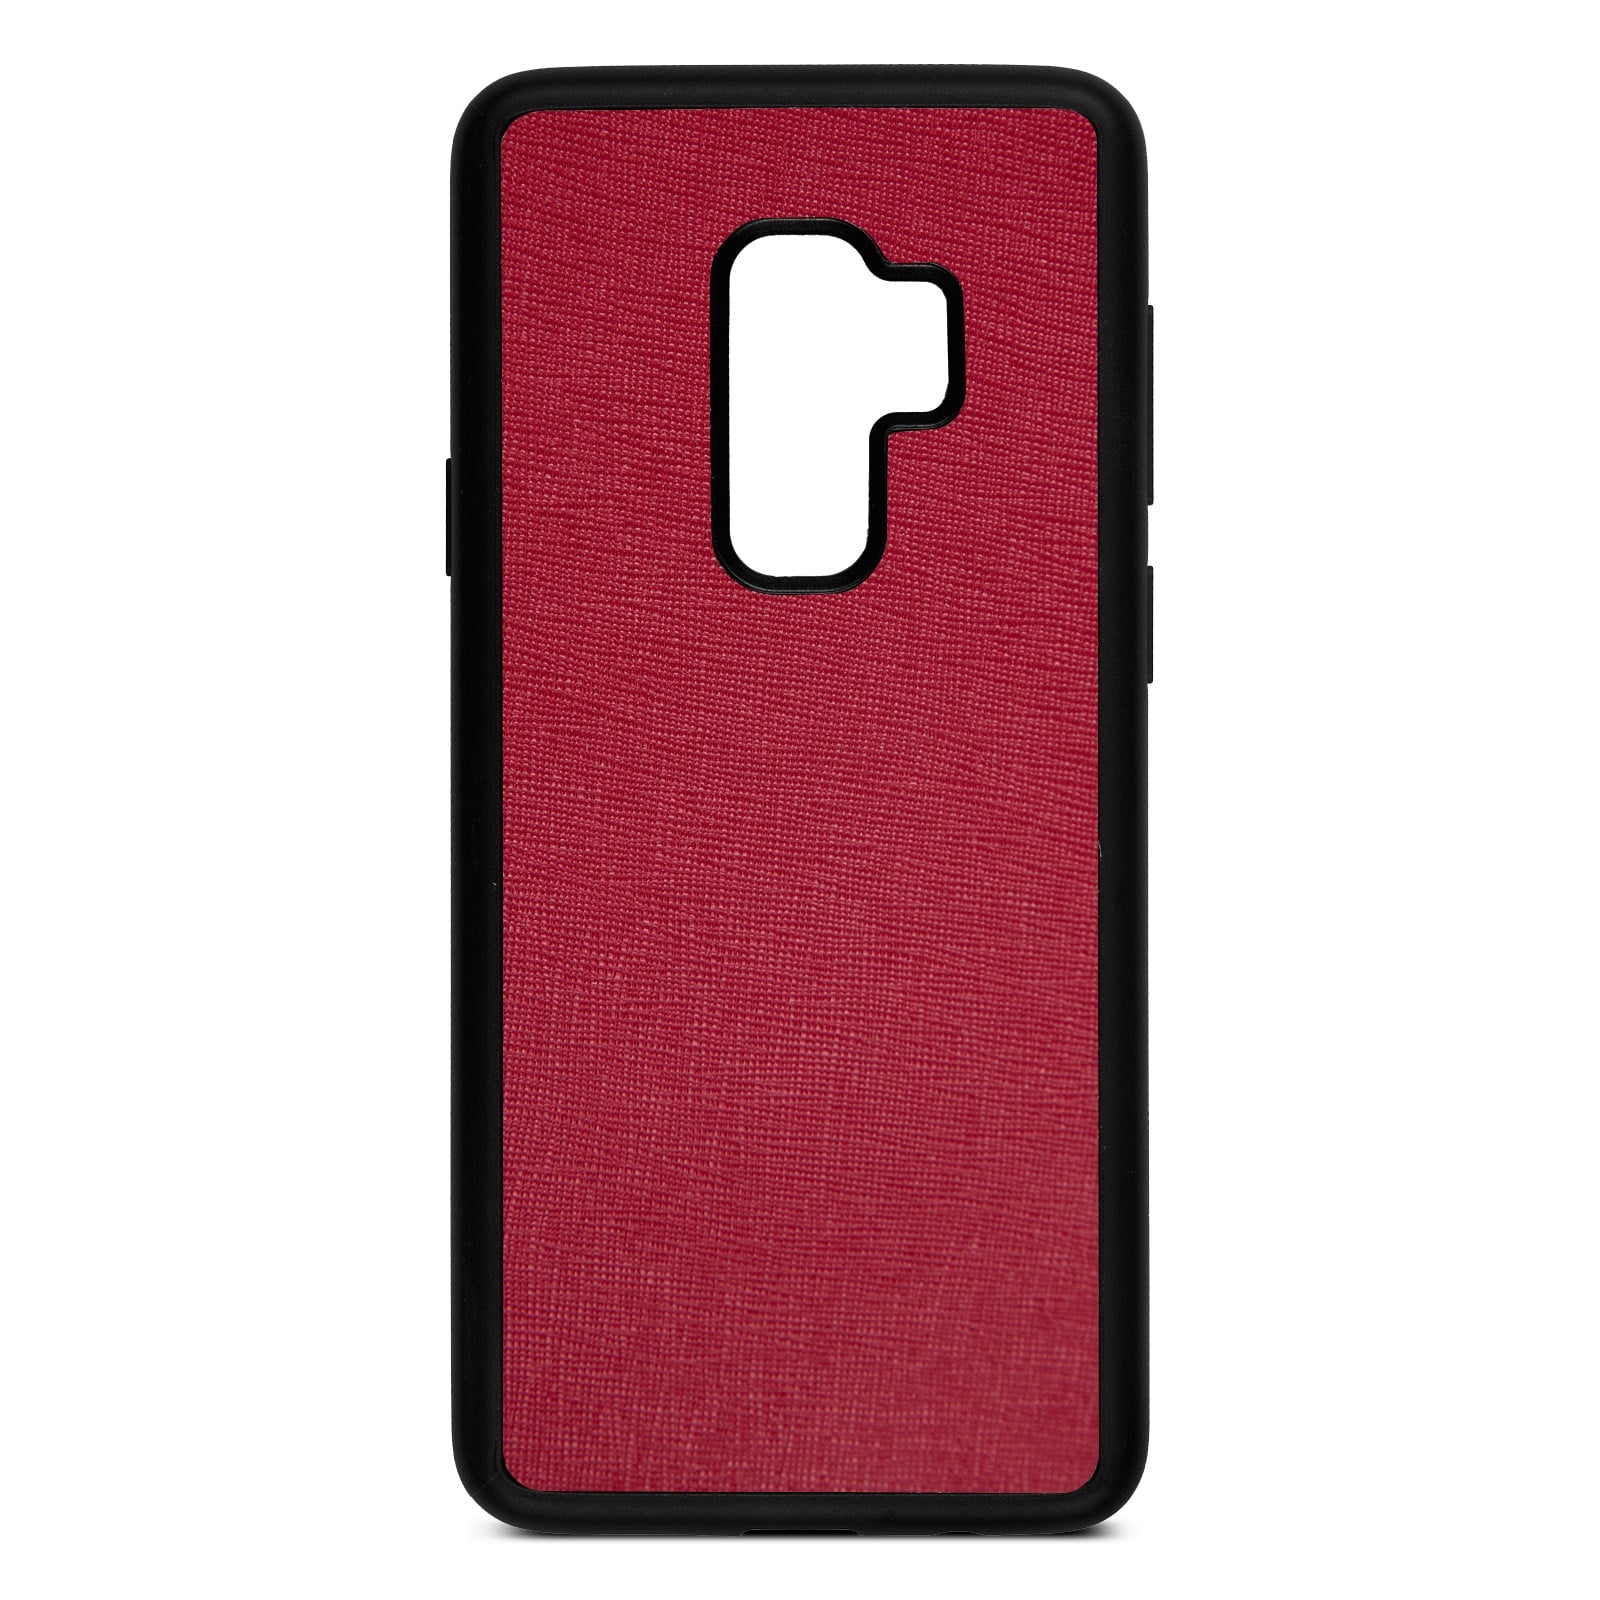 Blank Personalised Dark Red Saffiano Leather Samsung S9 Plus Case